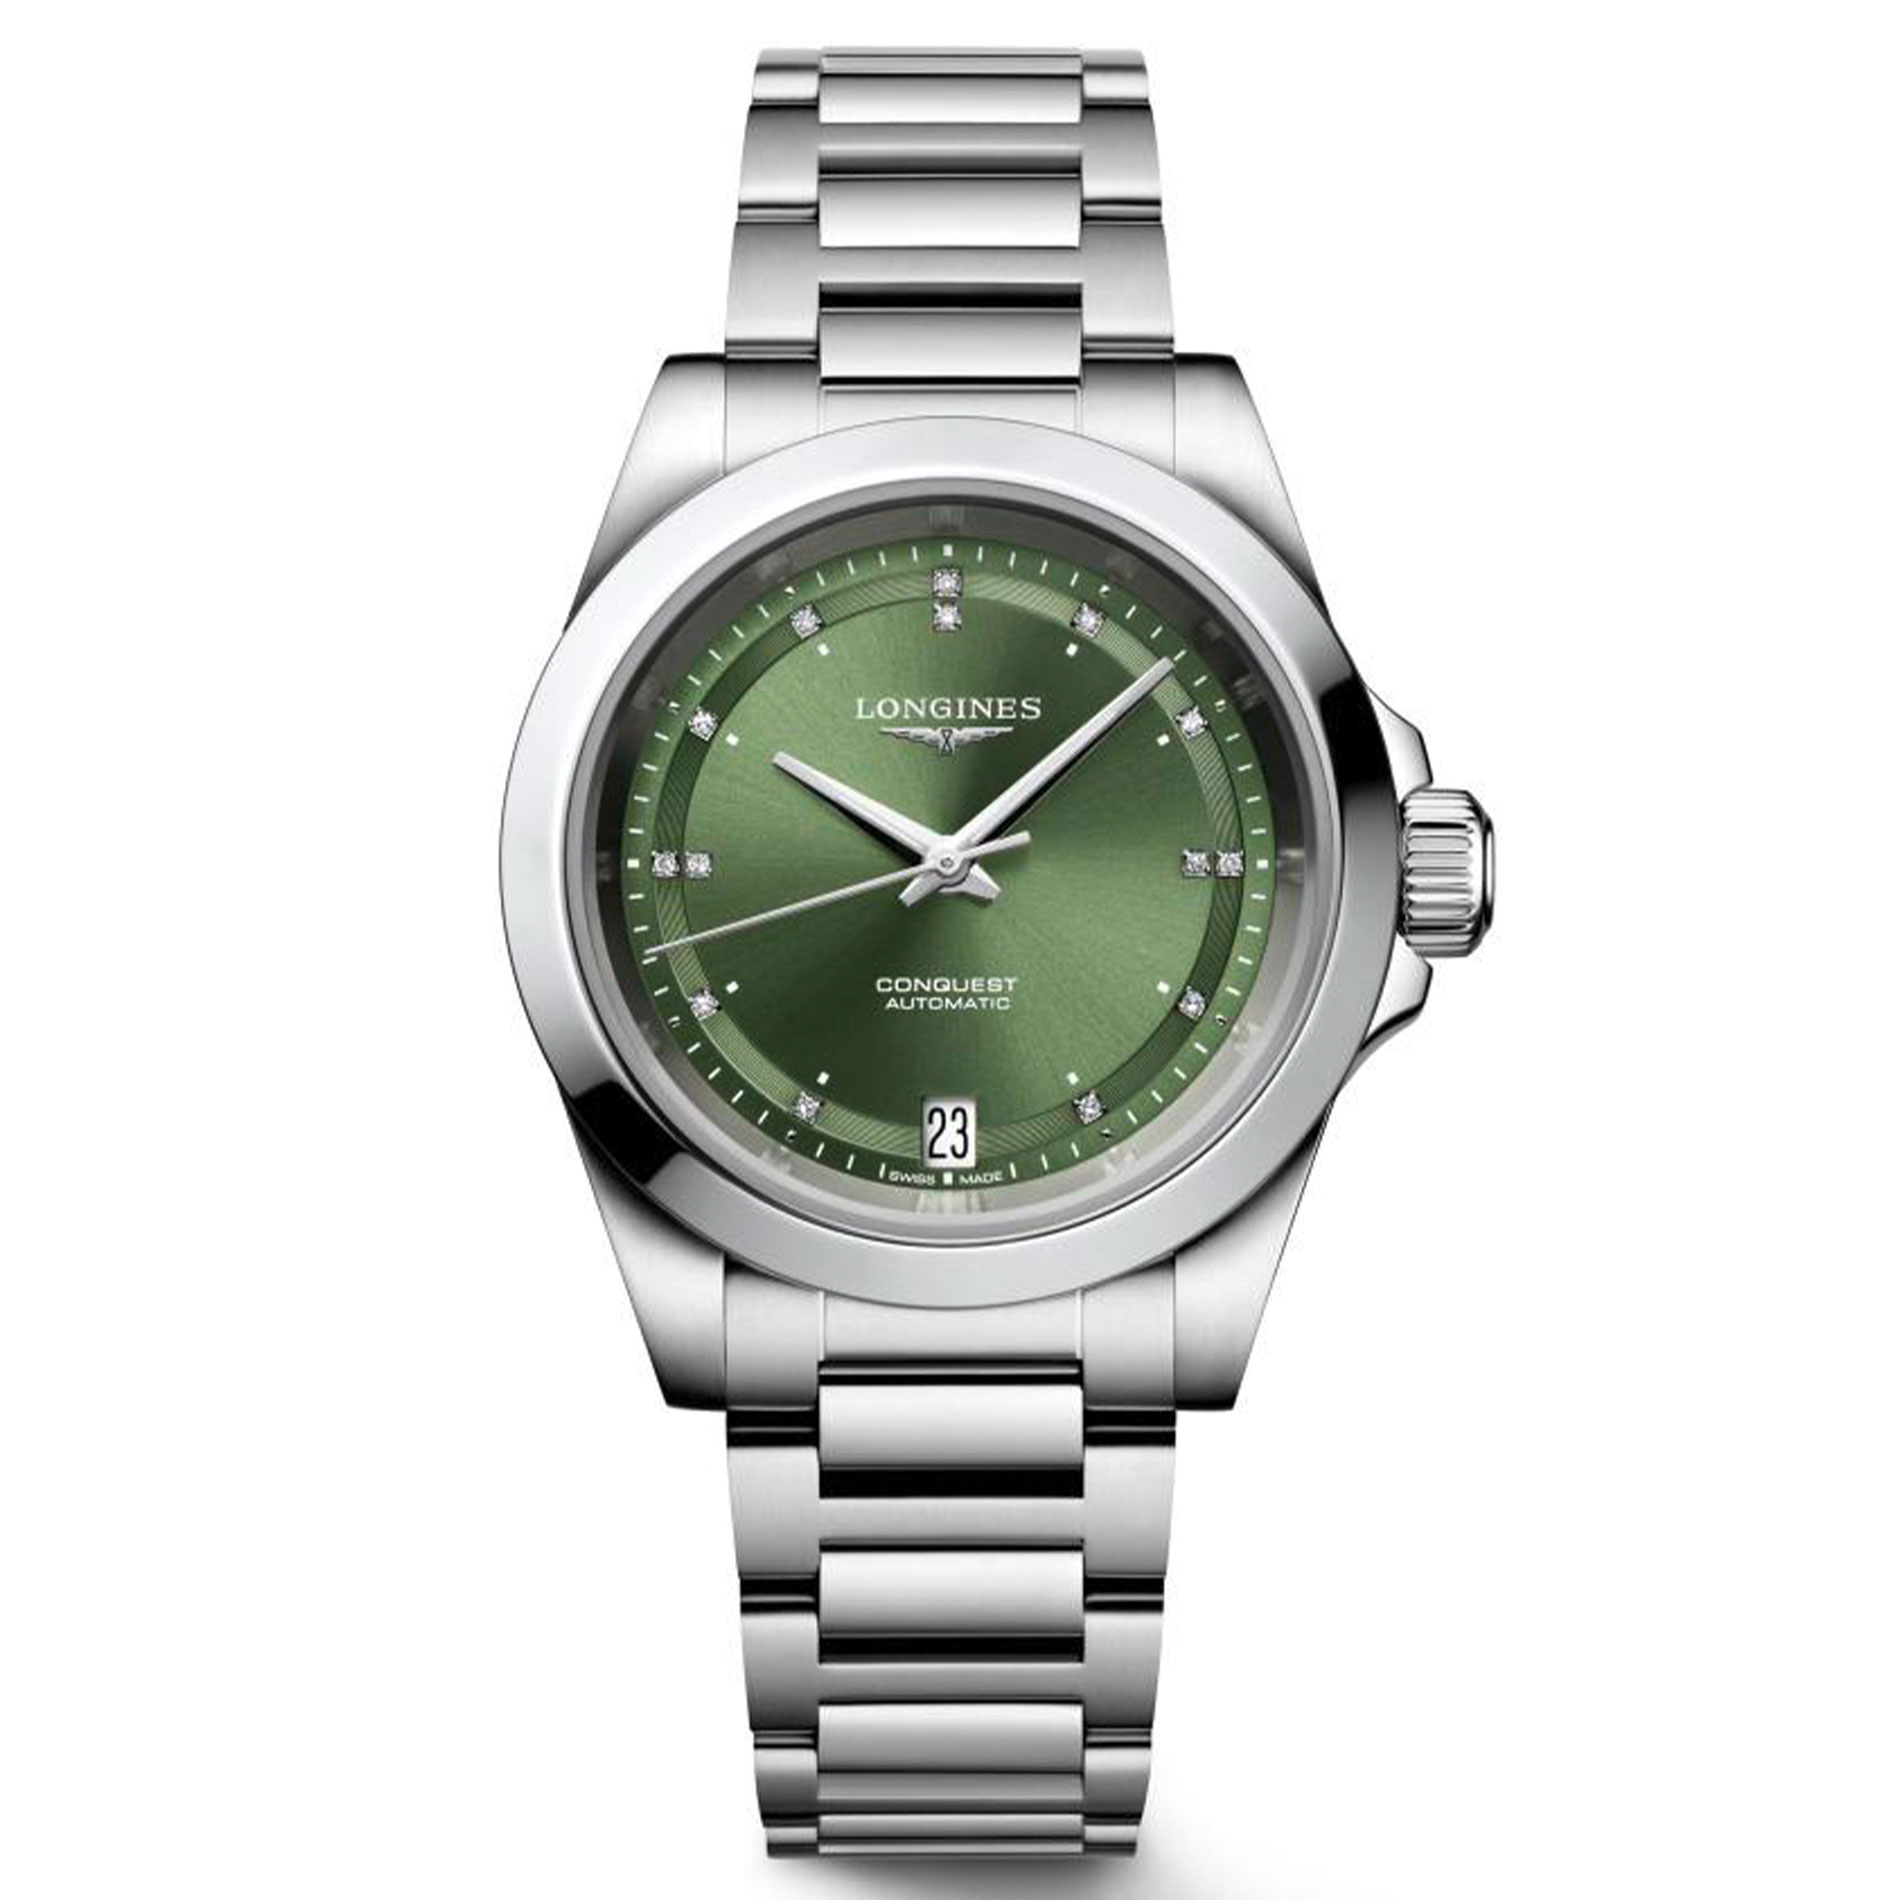 Longines Conquest Green Diamond Accented Dial Stainless Steel Bracelet Watch 34mm - L34304076